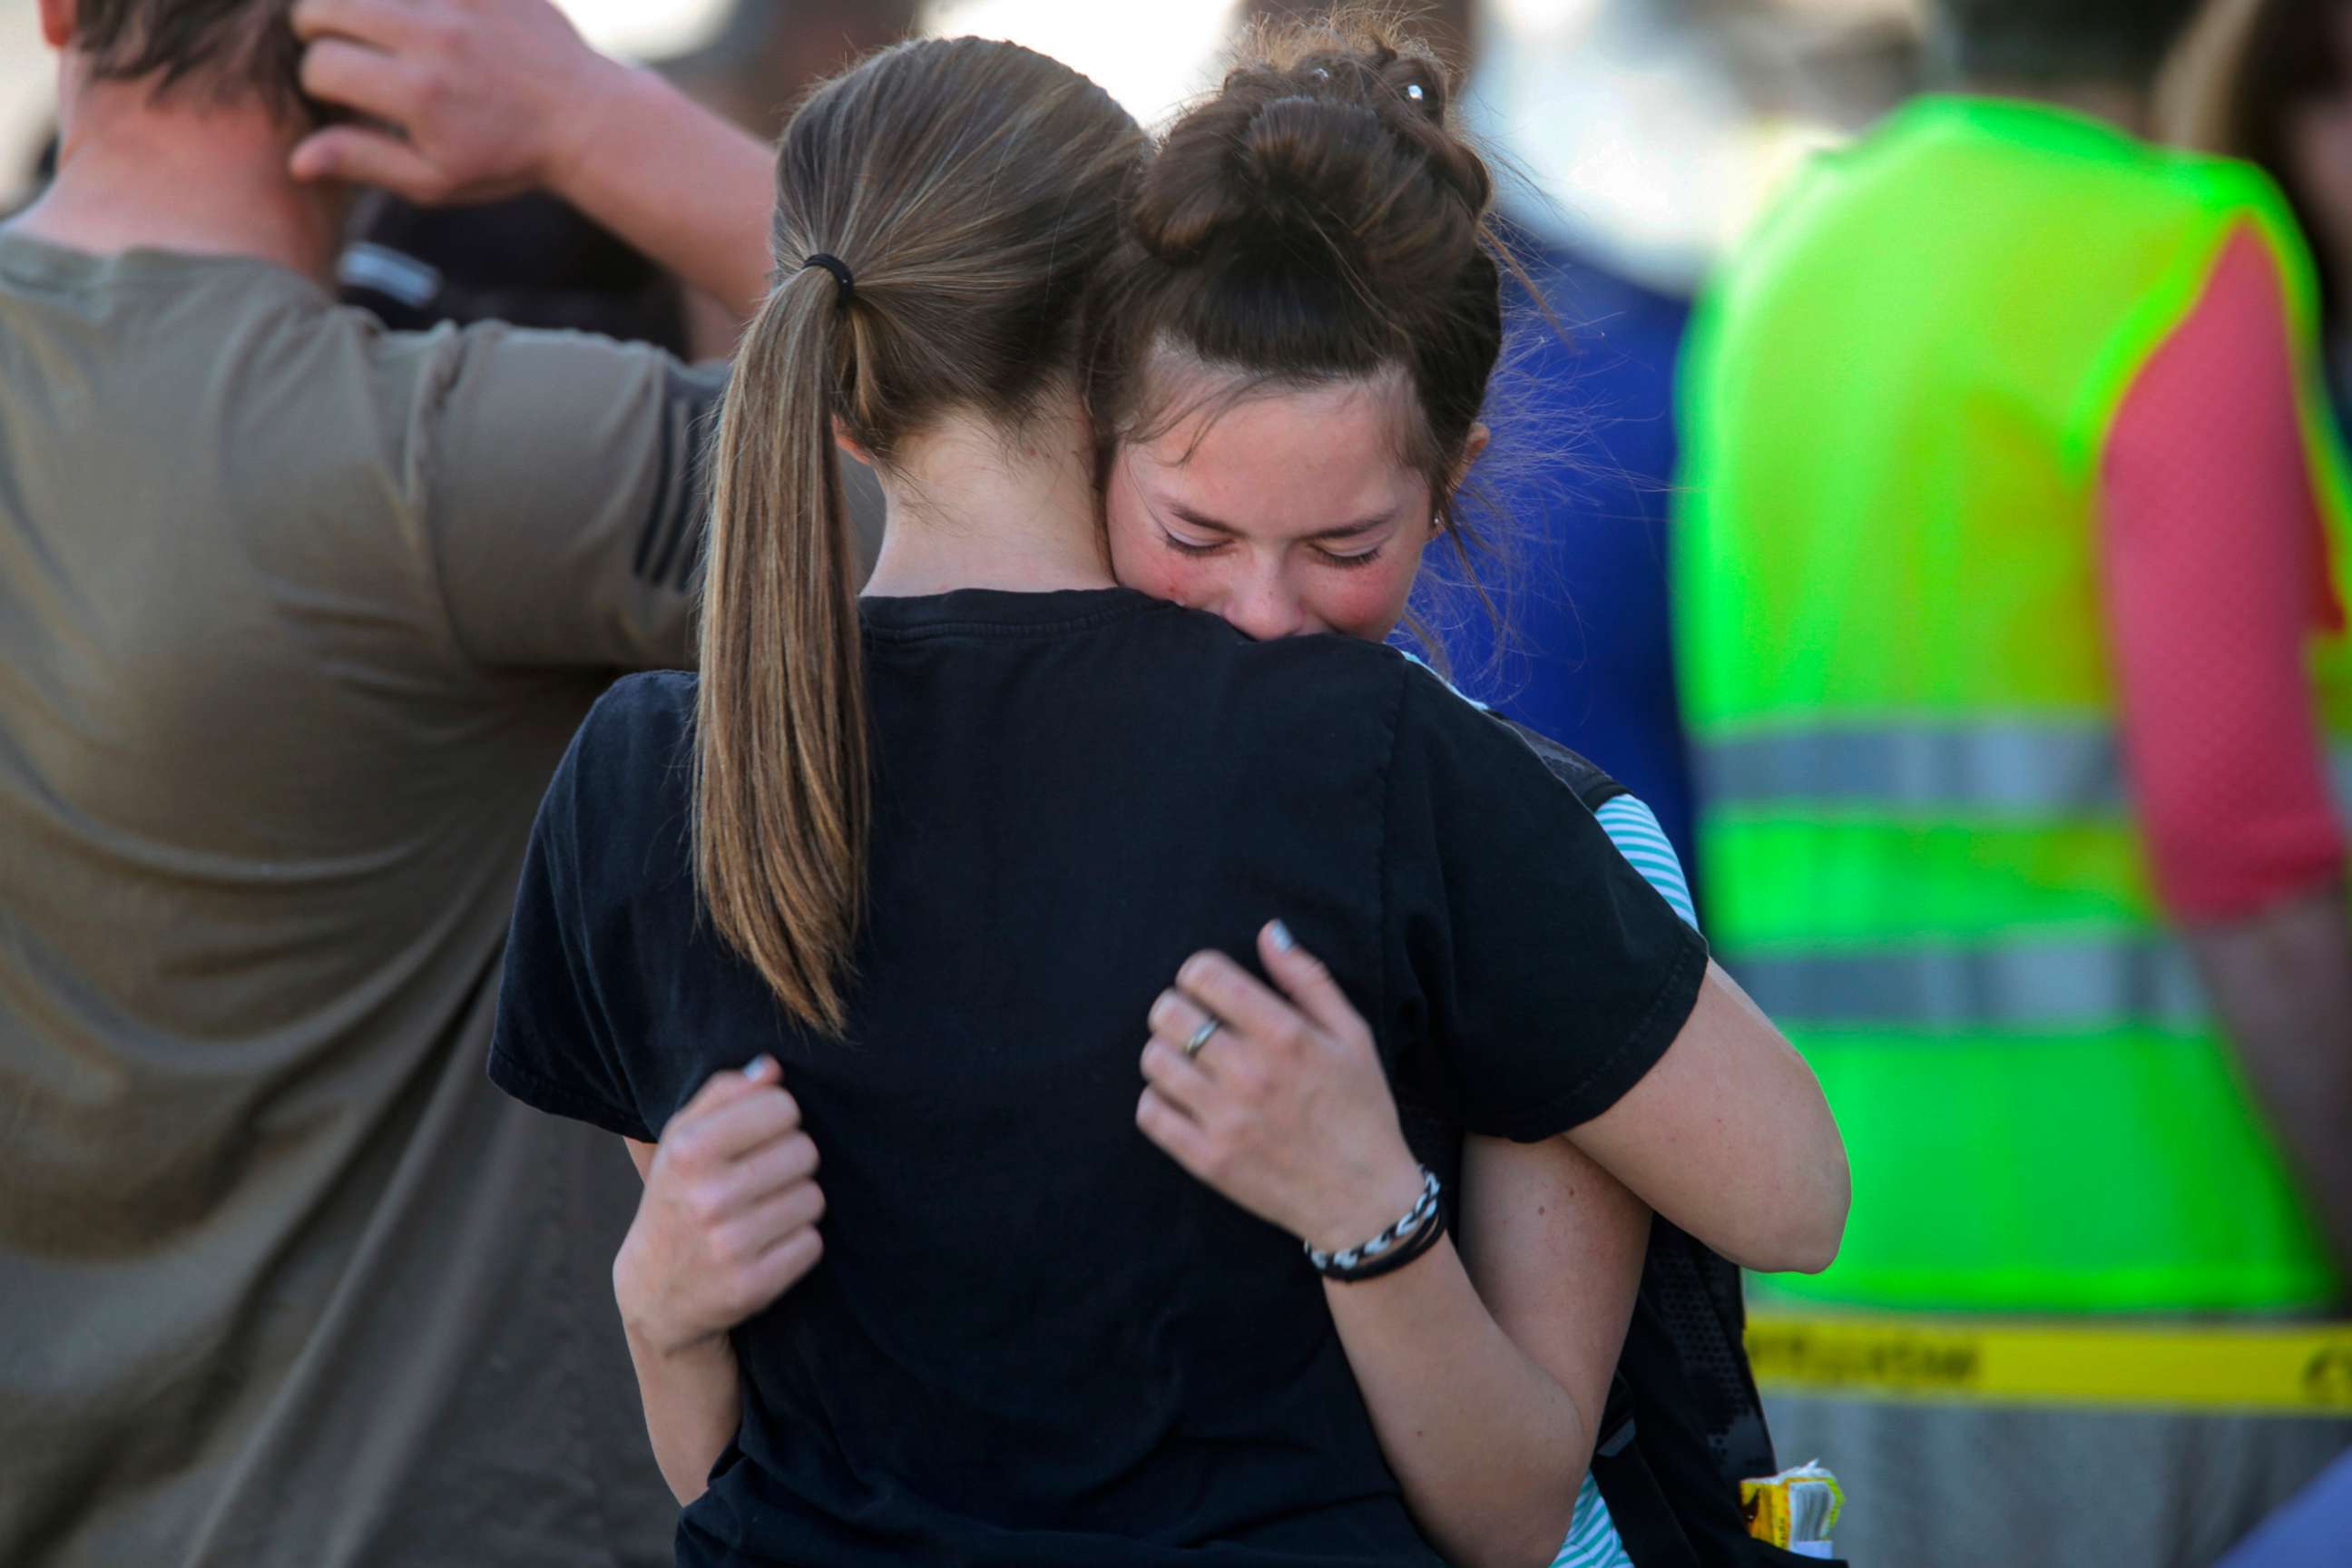 PHOTO: Students embrace after a school shooting at Rigby Middle School in Rigby, Idaho on Thursday, May 6, 2021.